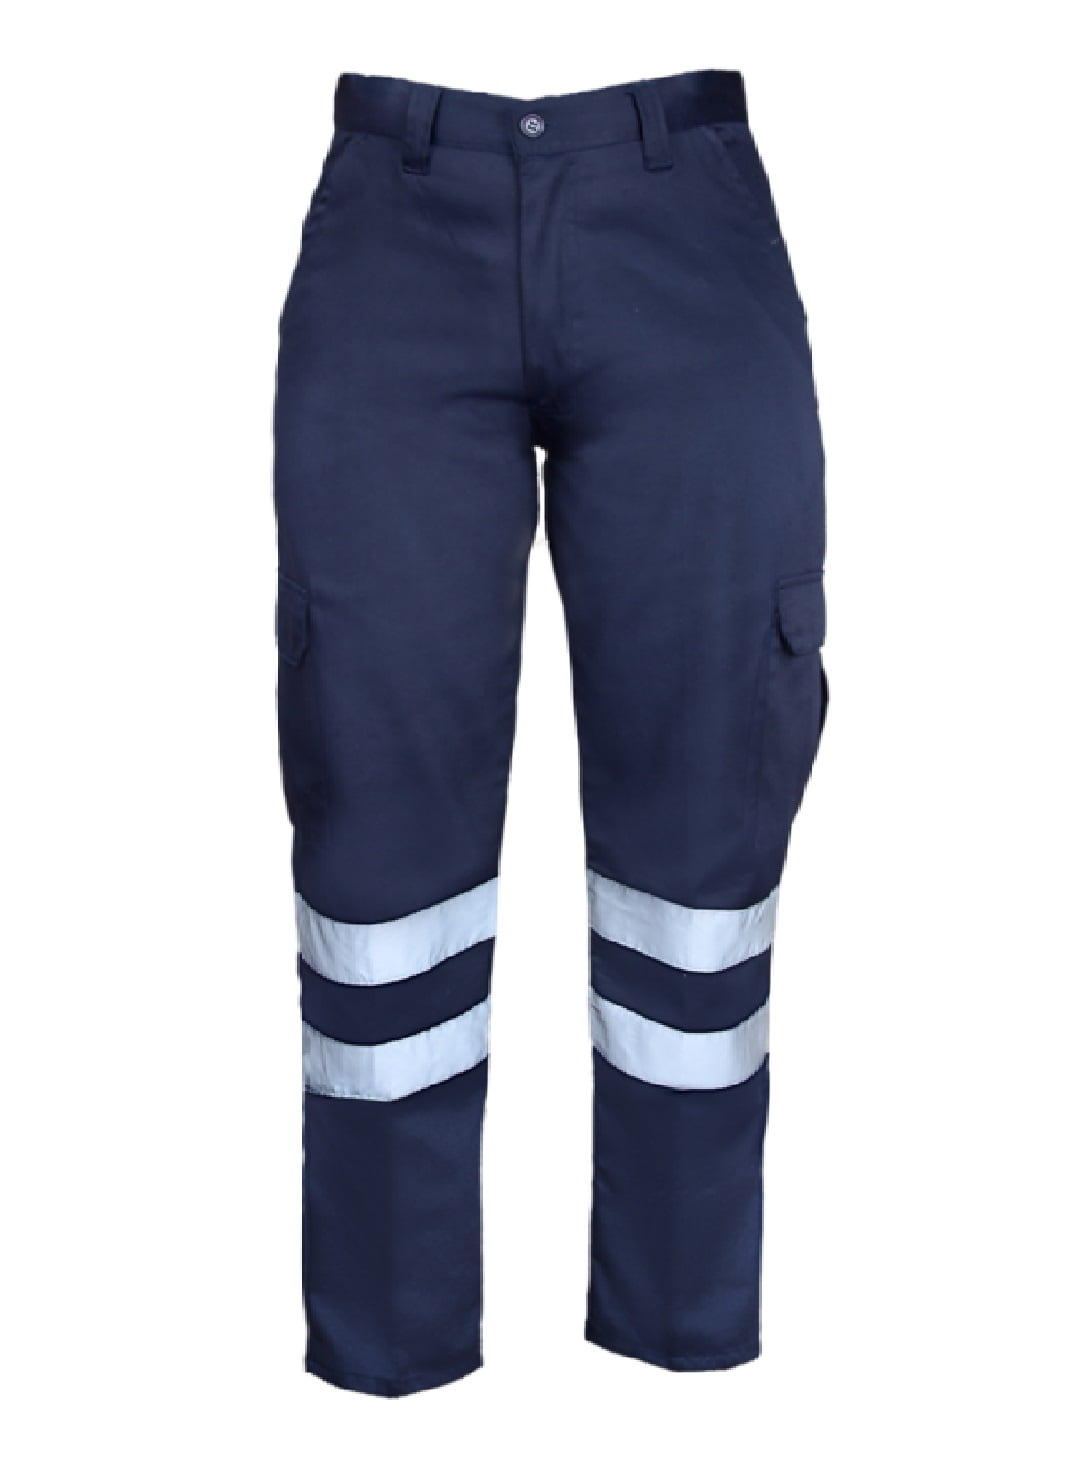 W34 x L32, Navy Blue High Visibility Hi Vis Safety Work Pant/Trouser 